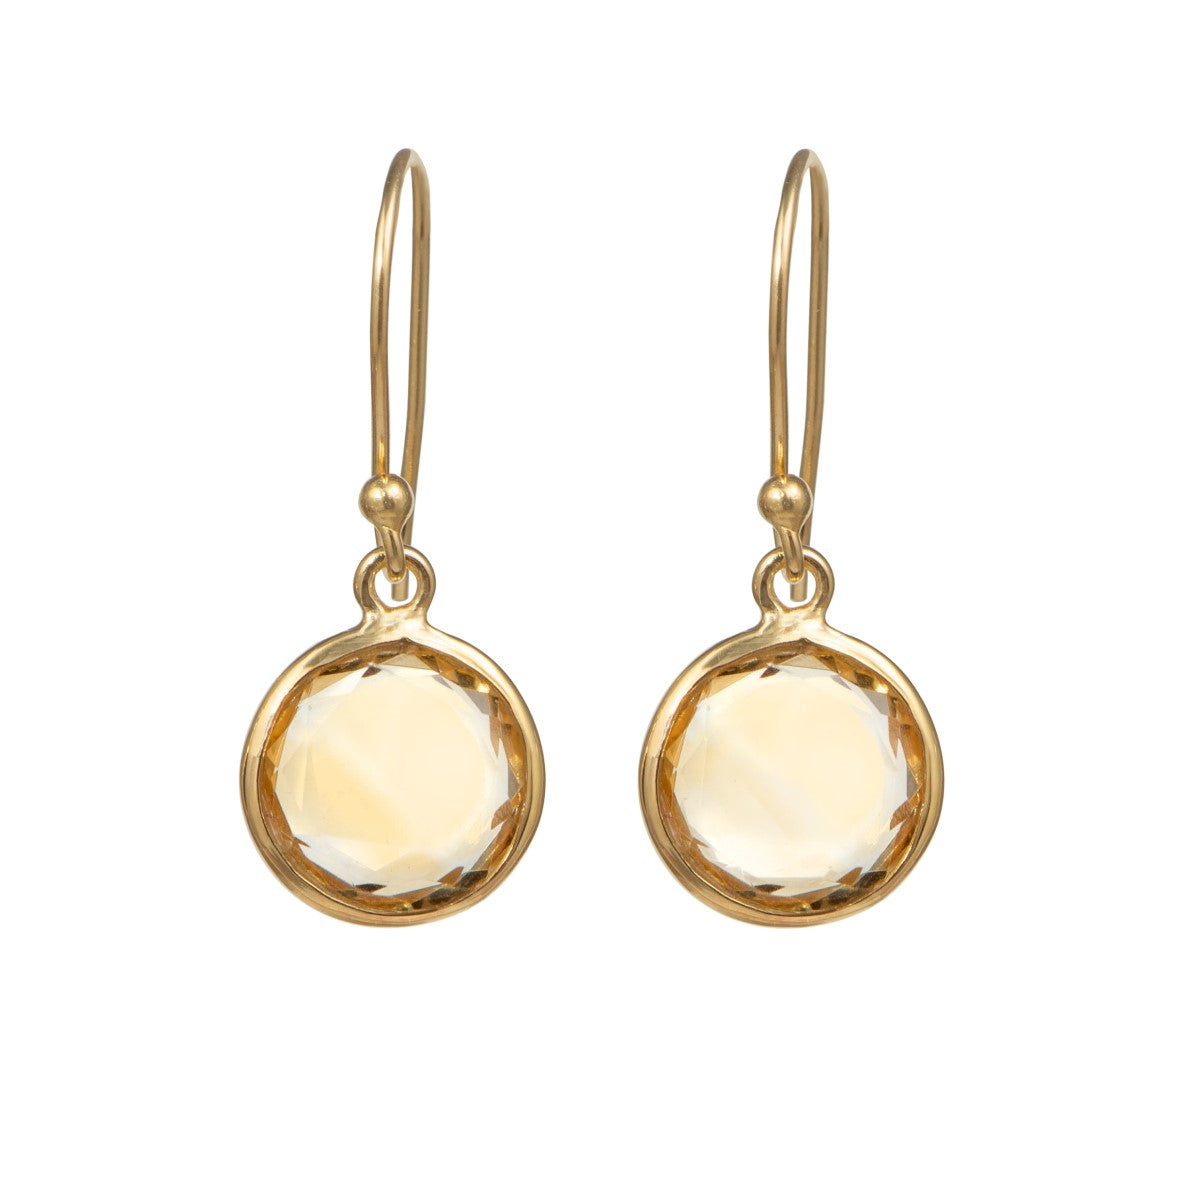 Citrine Gold Plated Sterling Silver Earrings with a Round Faceted Gemstone Drop